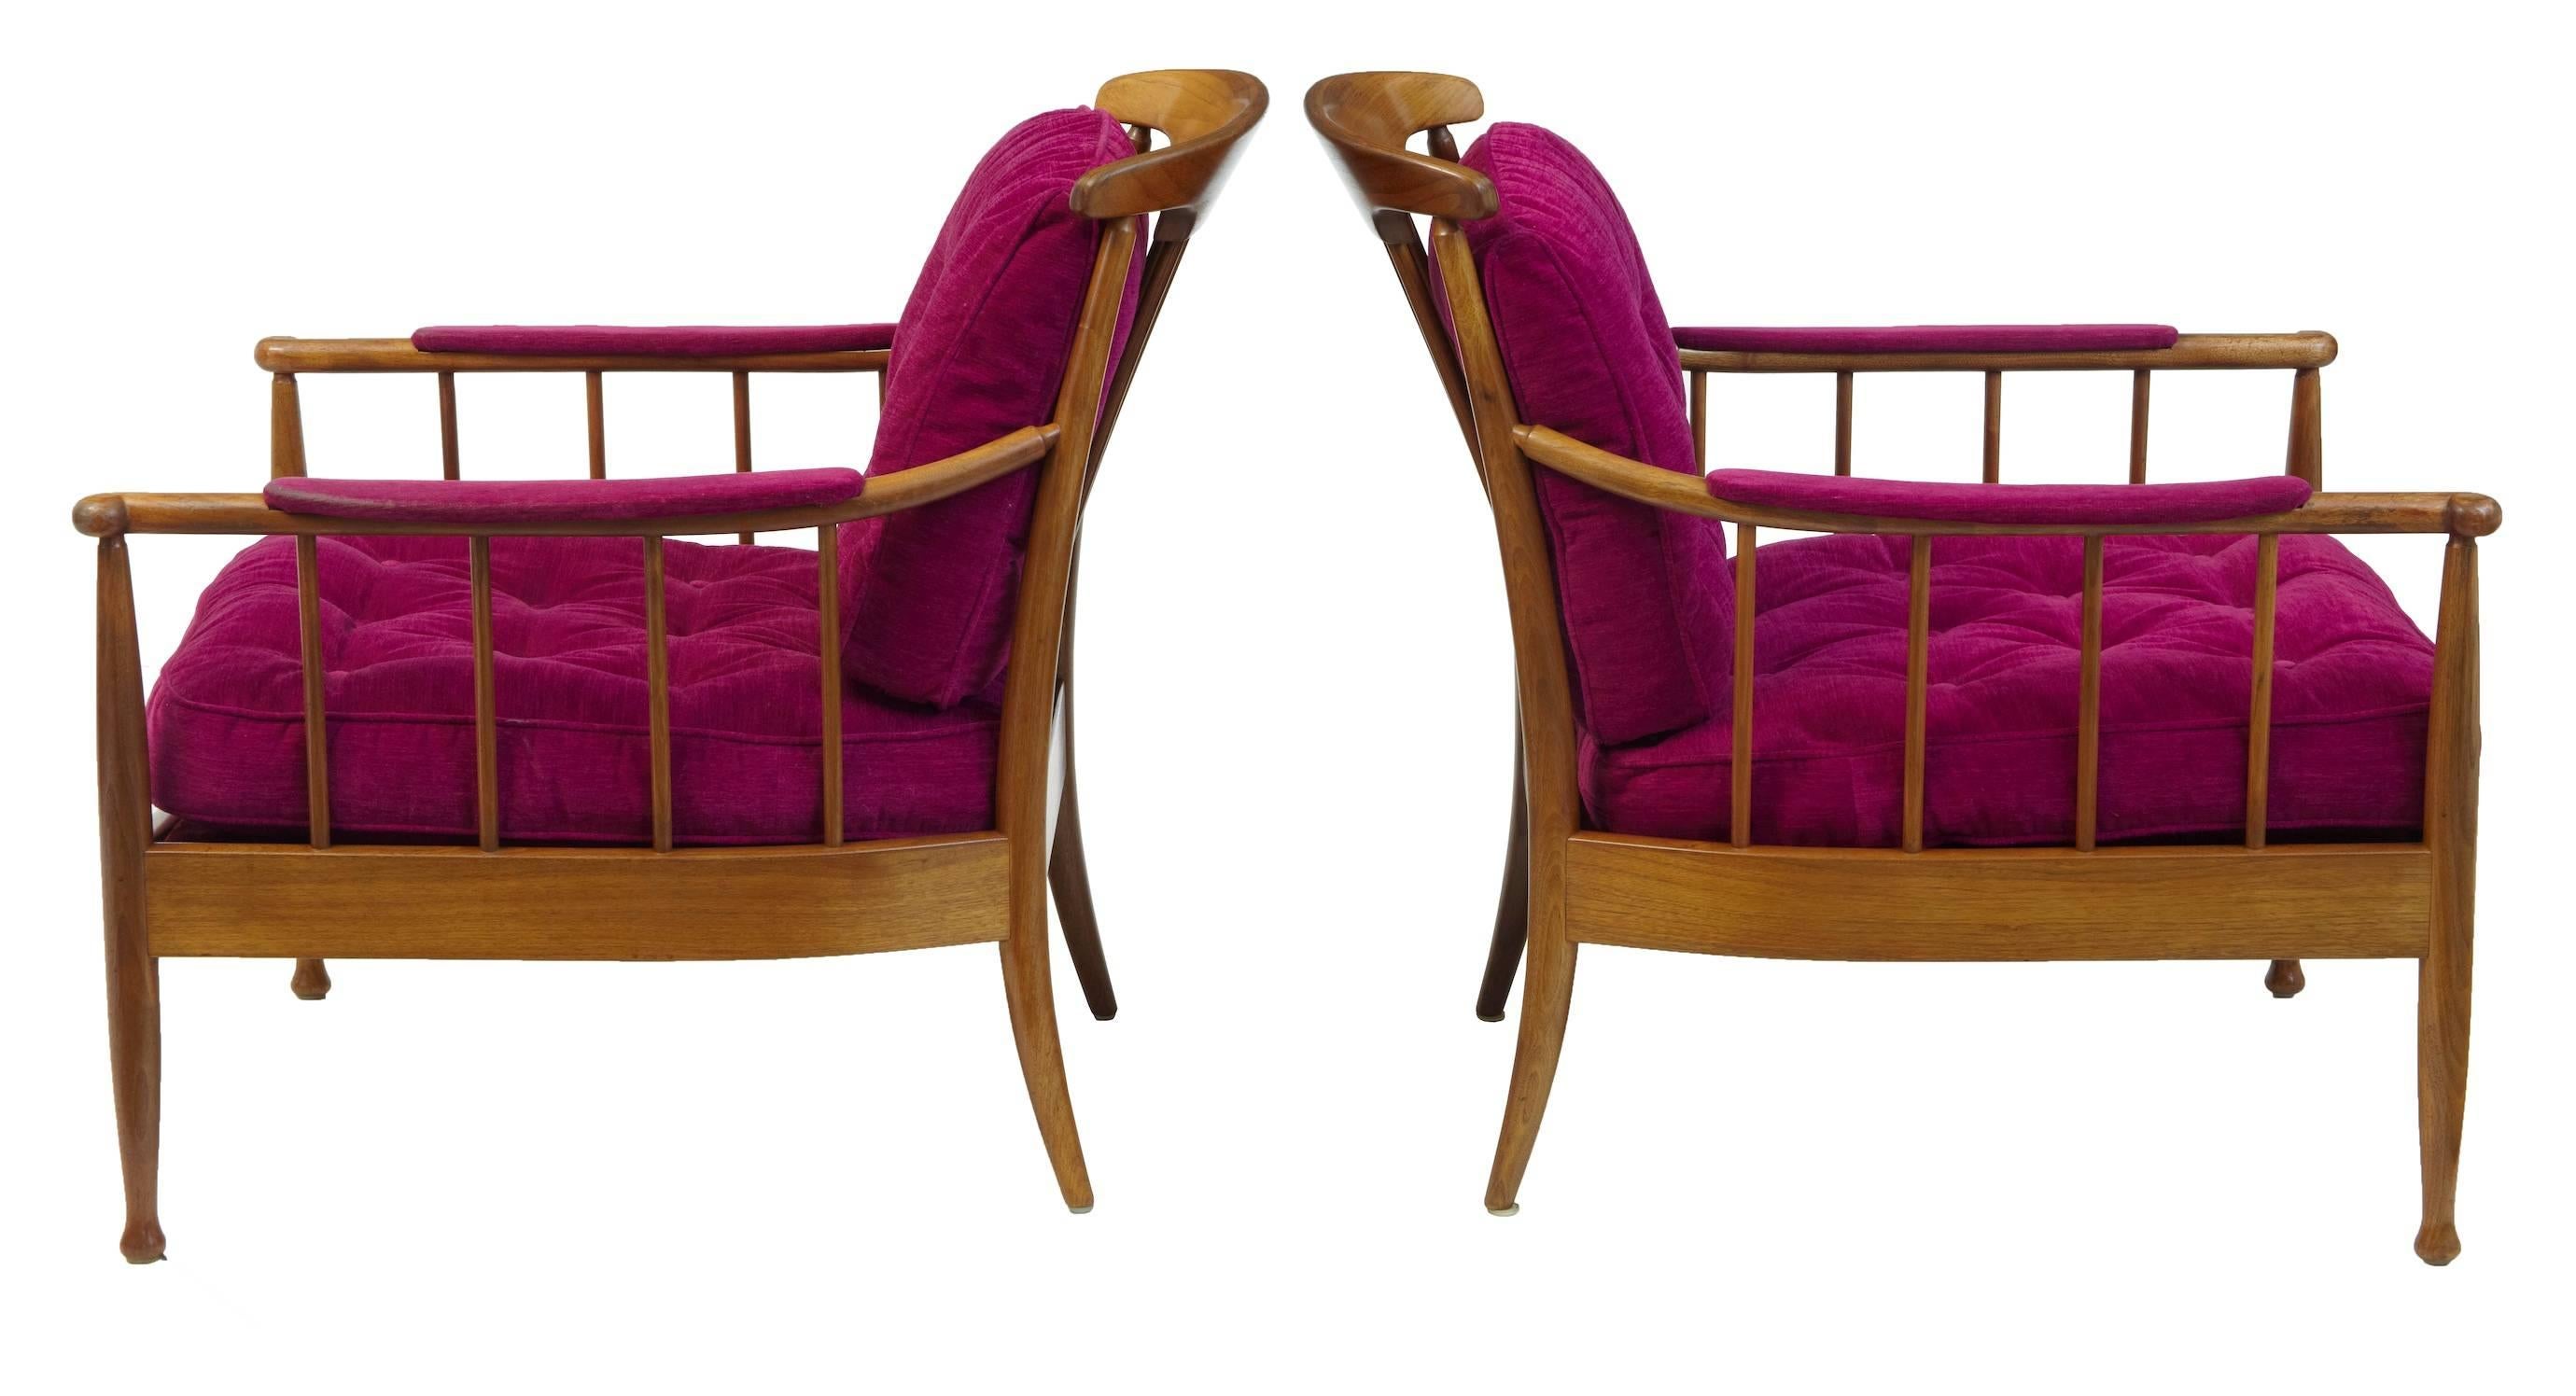 Iconic pair of chairs designed by kerstin horlin-holmquist, circa 1963.
Made by ope with their stamps on each chair.
Made in beech, colored to walnut.
Striking purple button back uphostery.
Minor wear to arms.

Measures: Height: 31